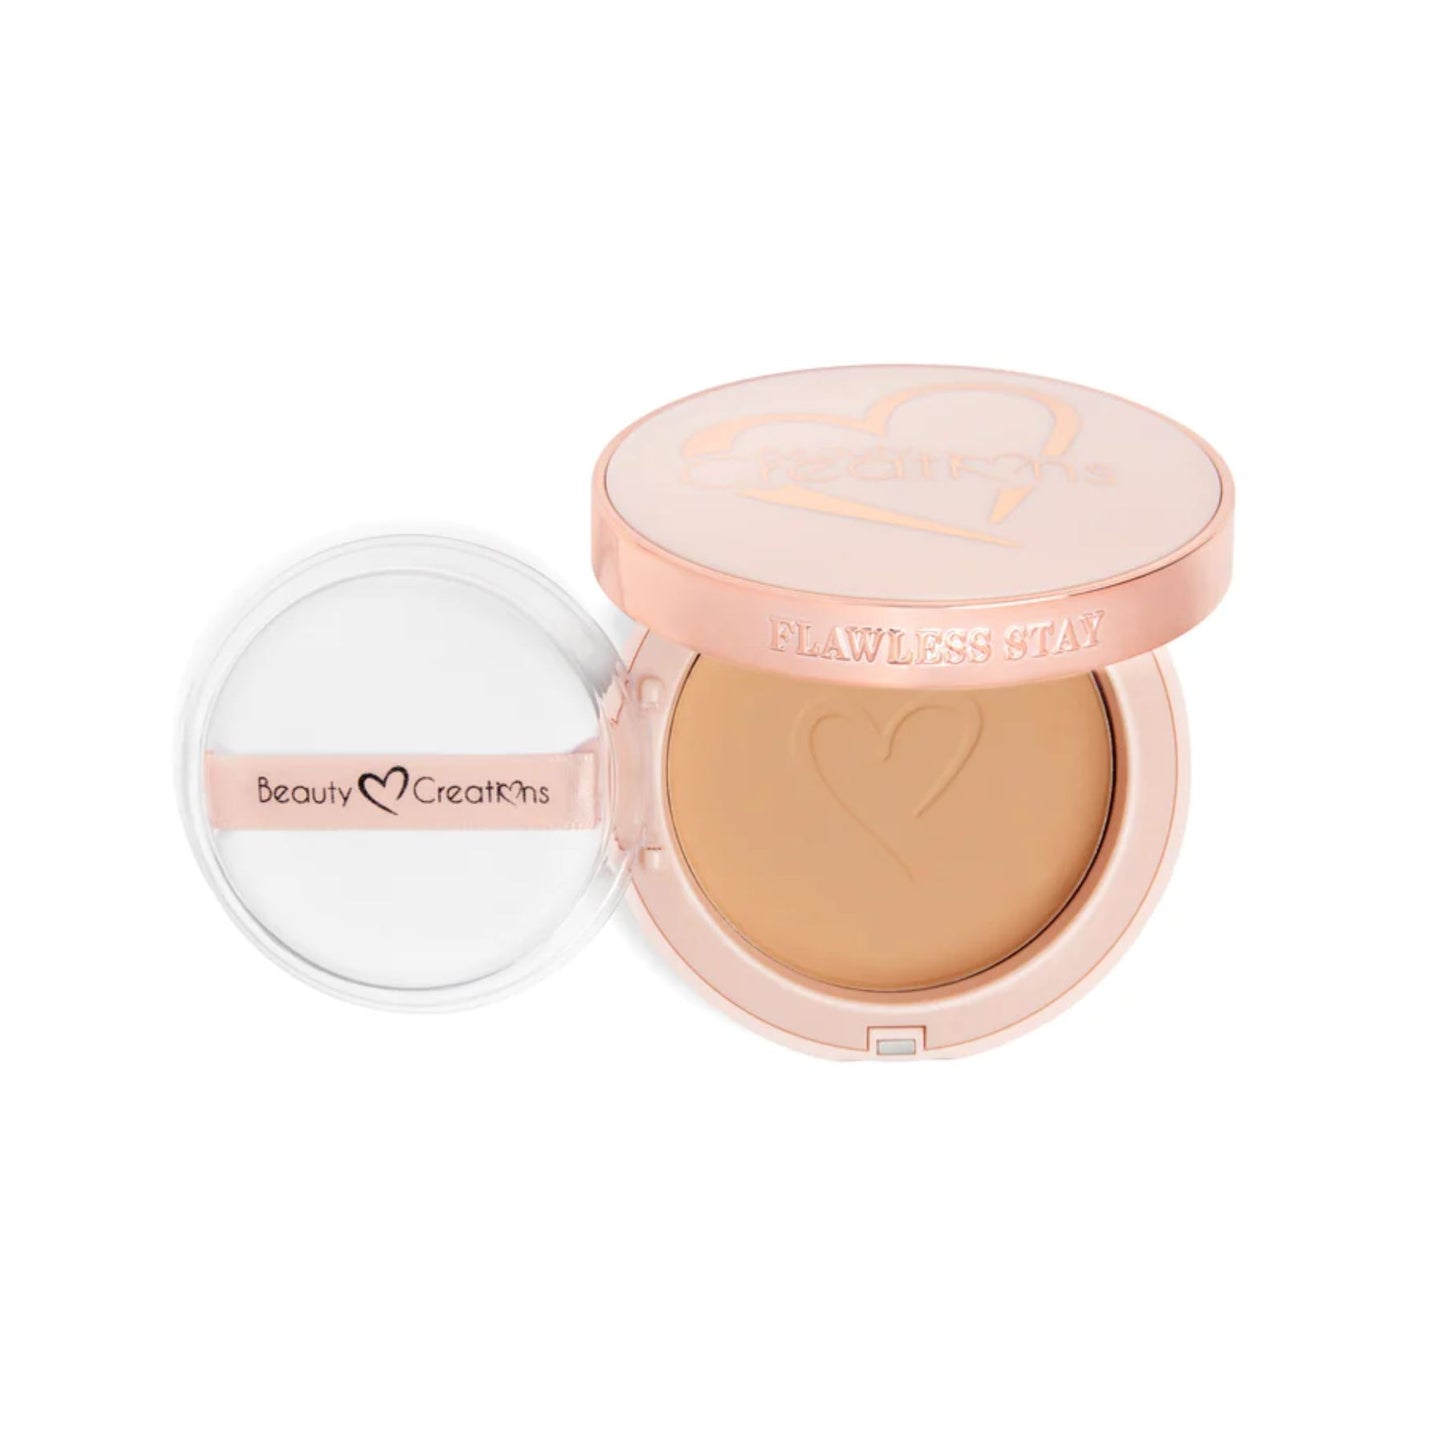 Polvo Compacto FLAWLESS STAY POWDER FOUNDATION BEAUTY CREATIONS